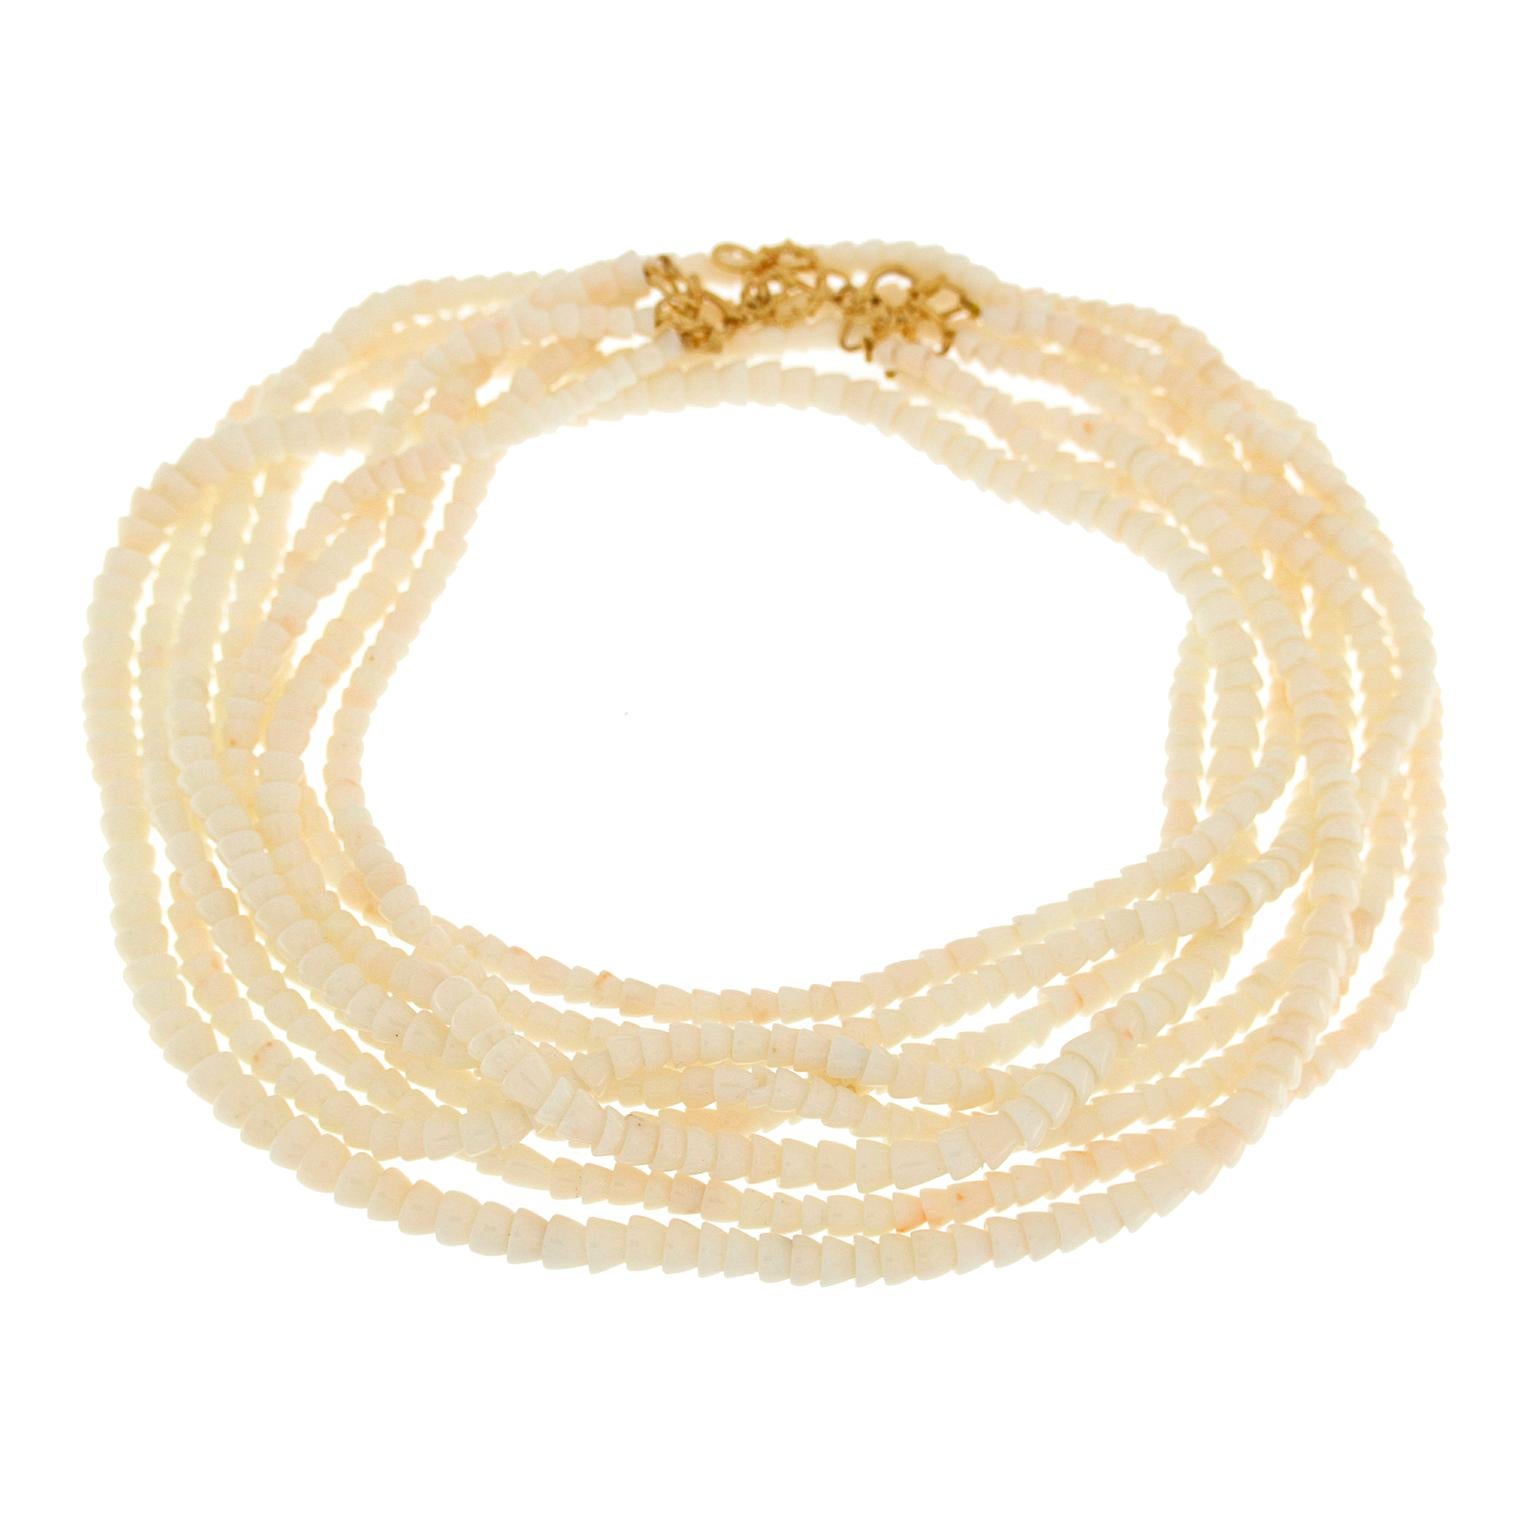 Valentin Magro Four-Strand White Coral Cone Necklace showcases an abundance of beads. Recycled white coral with subtle color variation is the gem of choice, carved into countless cones. The pieces are strung into four rows, connected at the ends